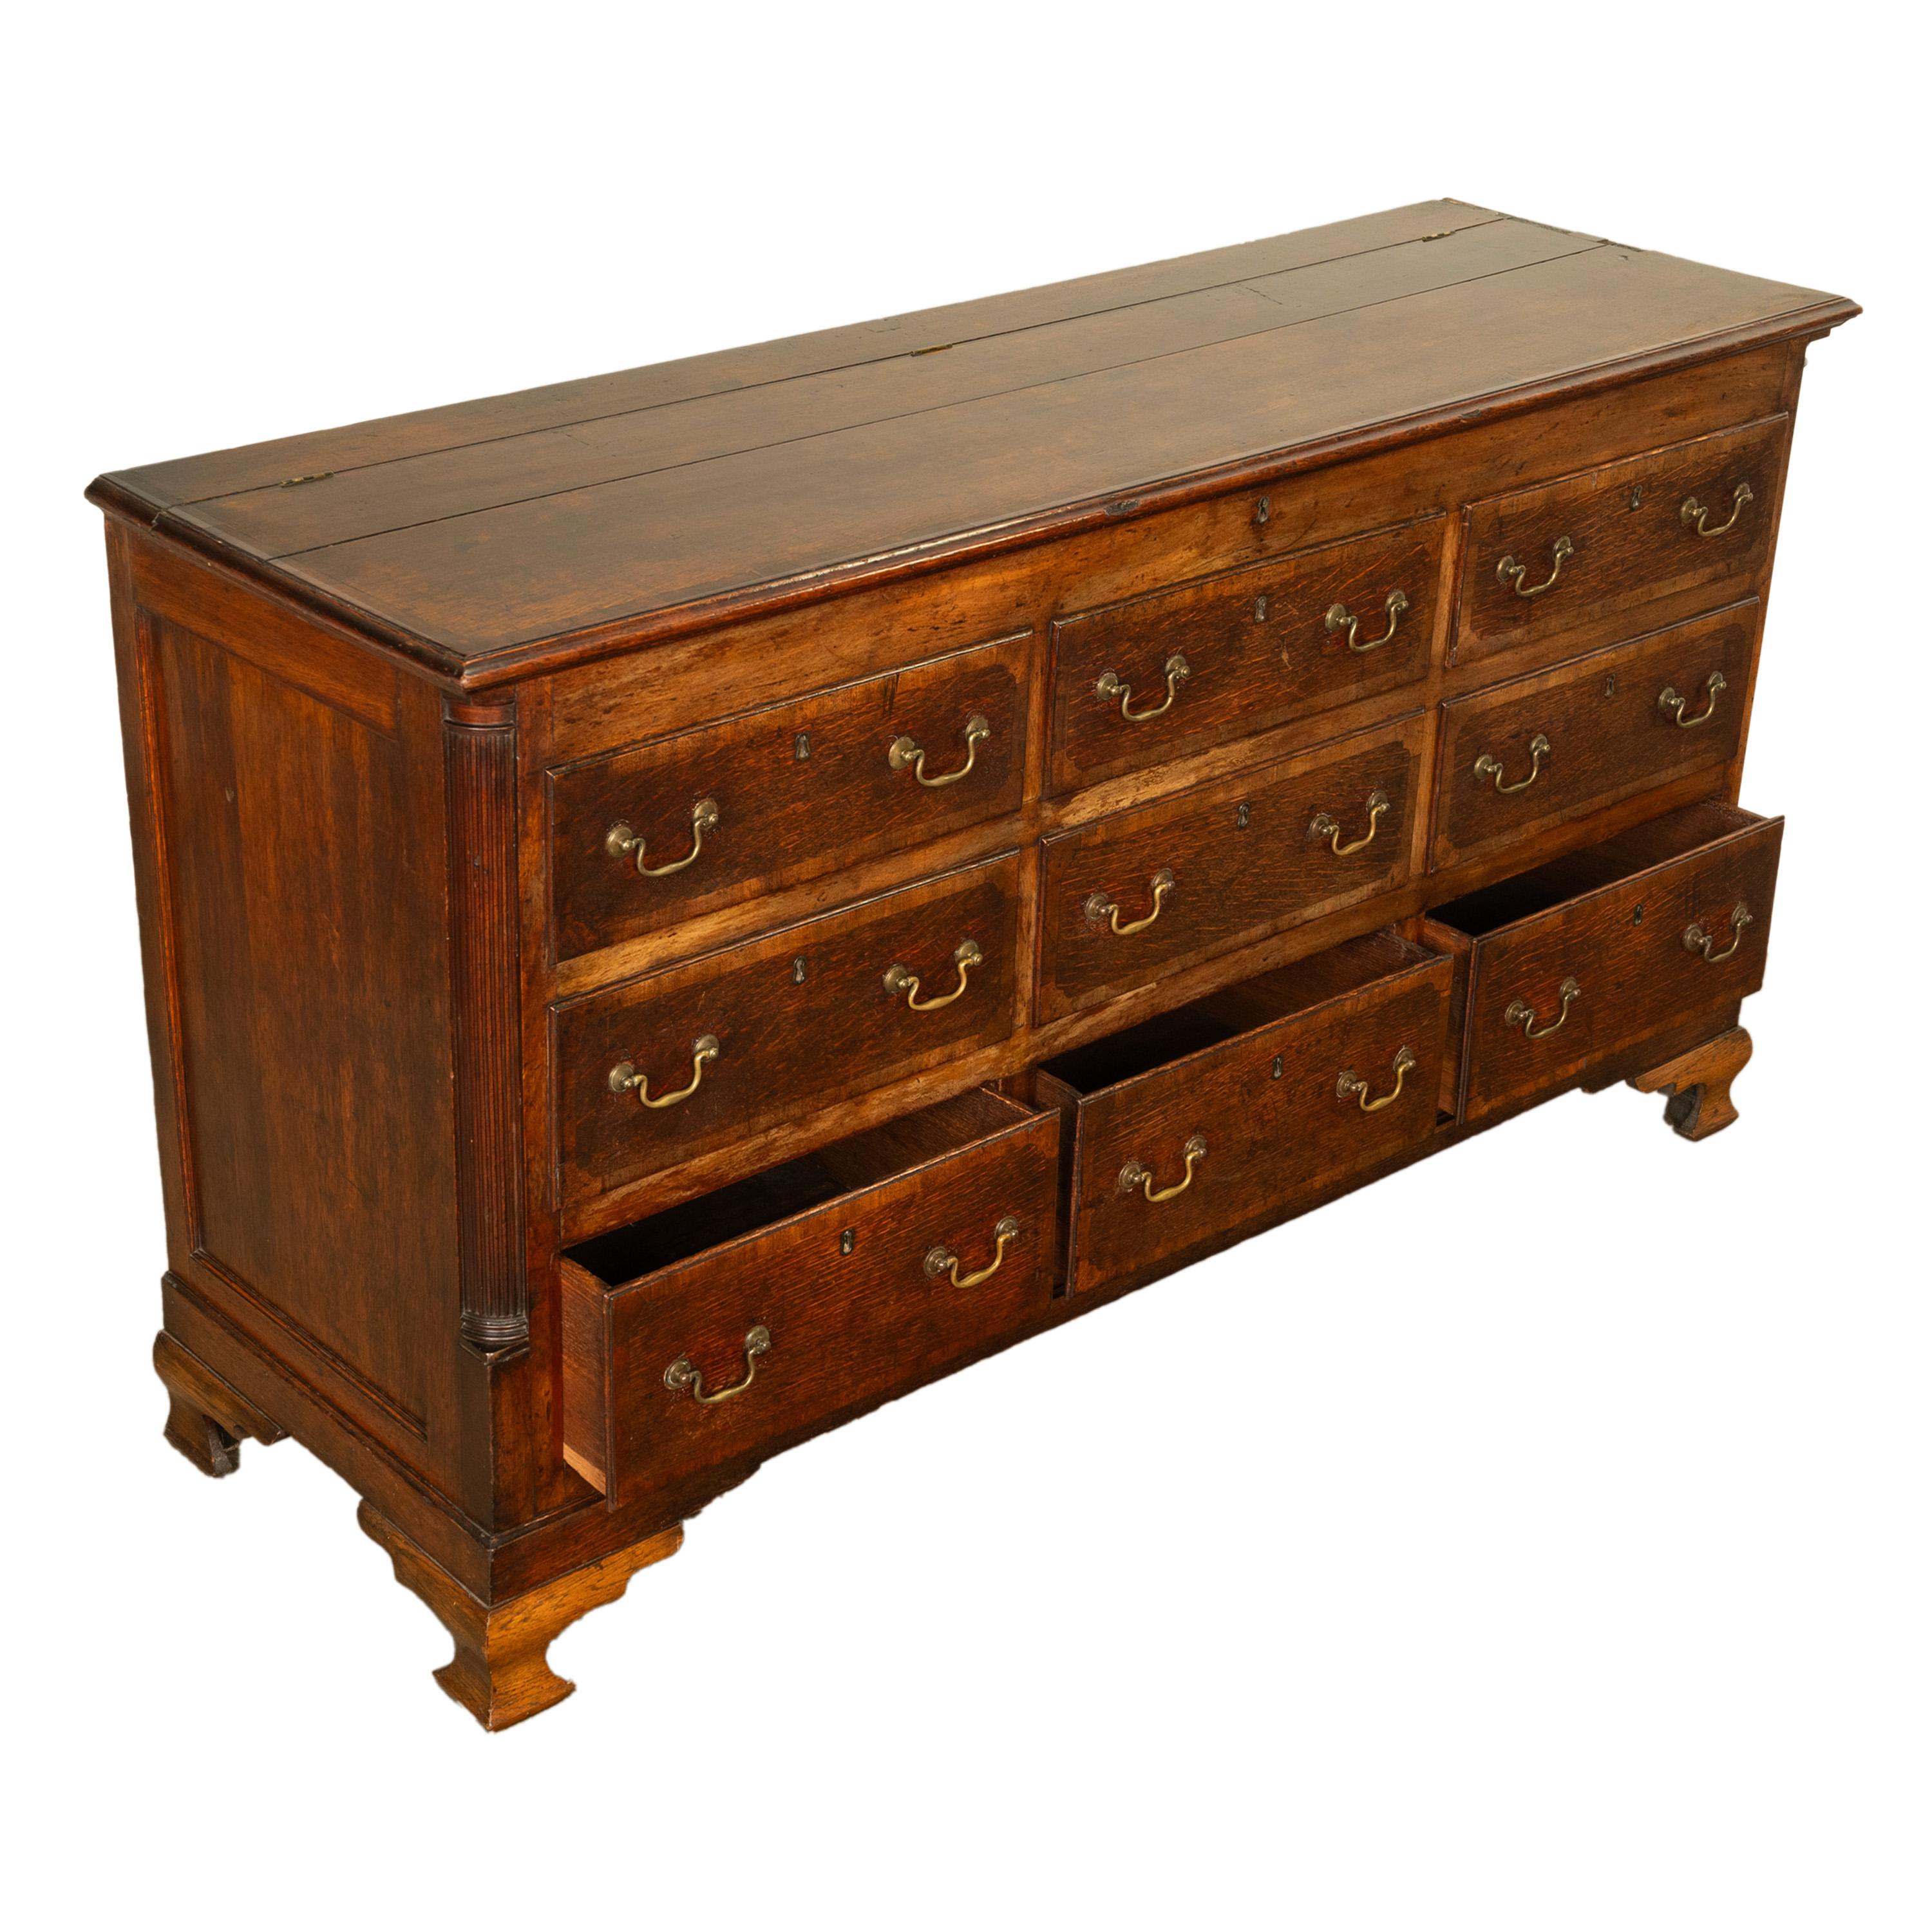 Antique 18th C Georgian Oak Mahogany Hinged Top Mule Chest Coffer Sideboard 1770 For Sale 6